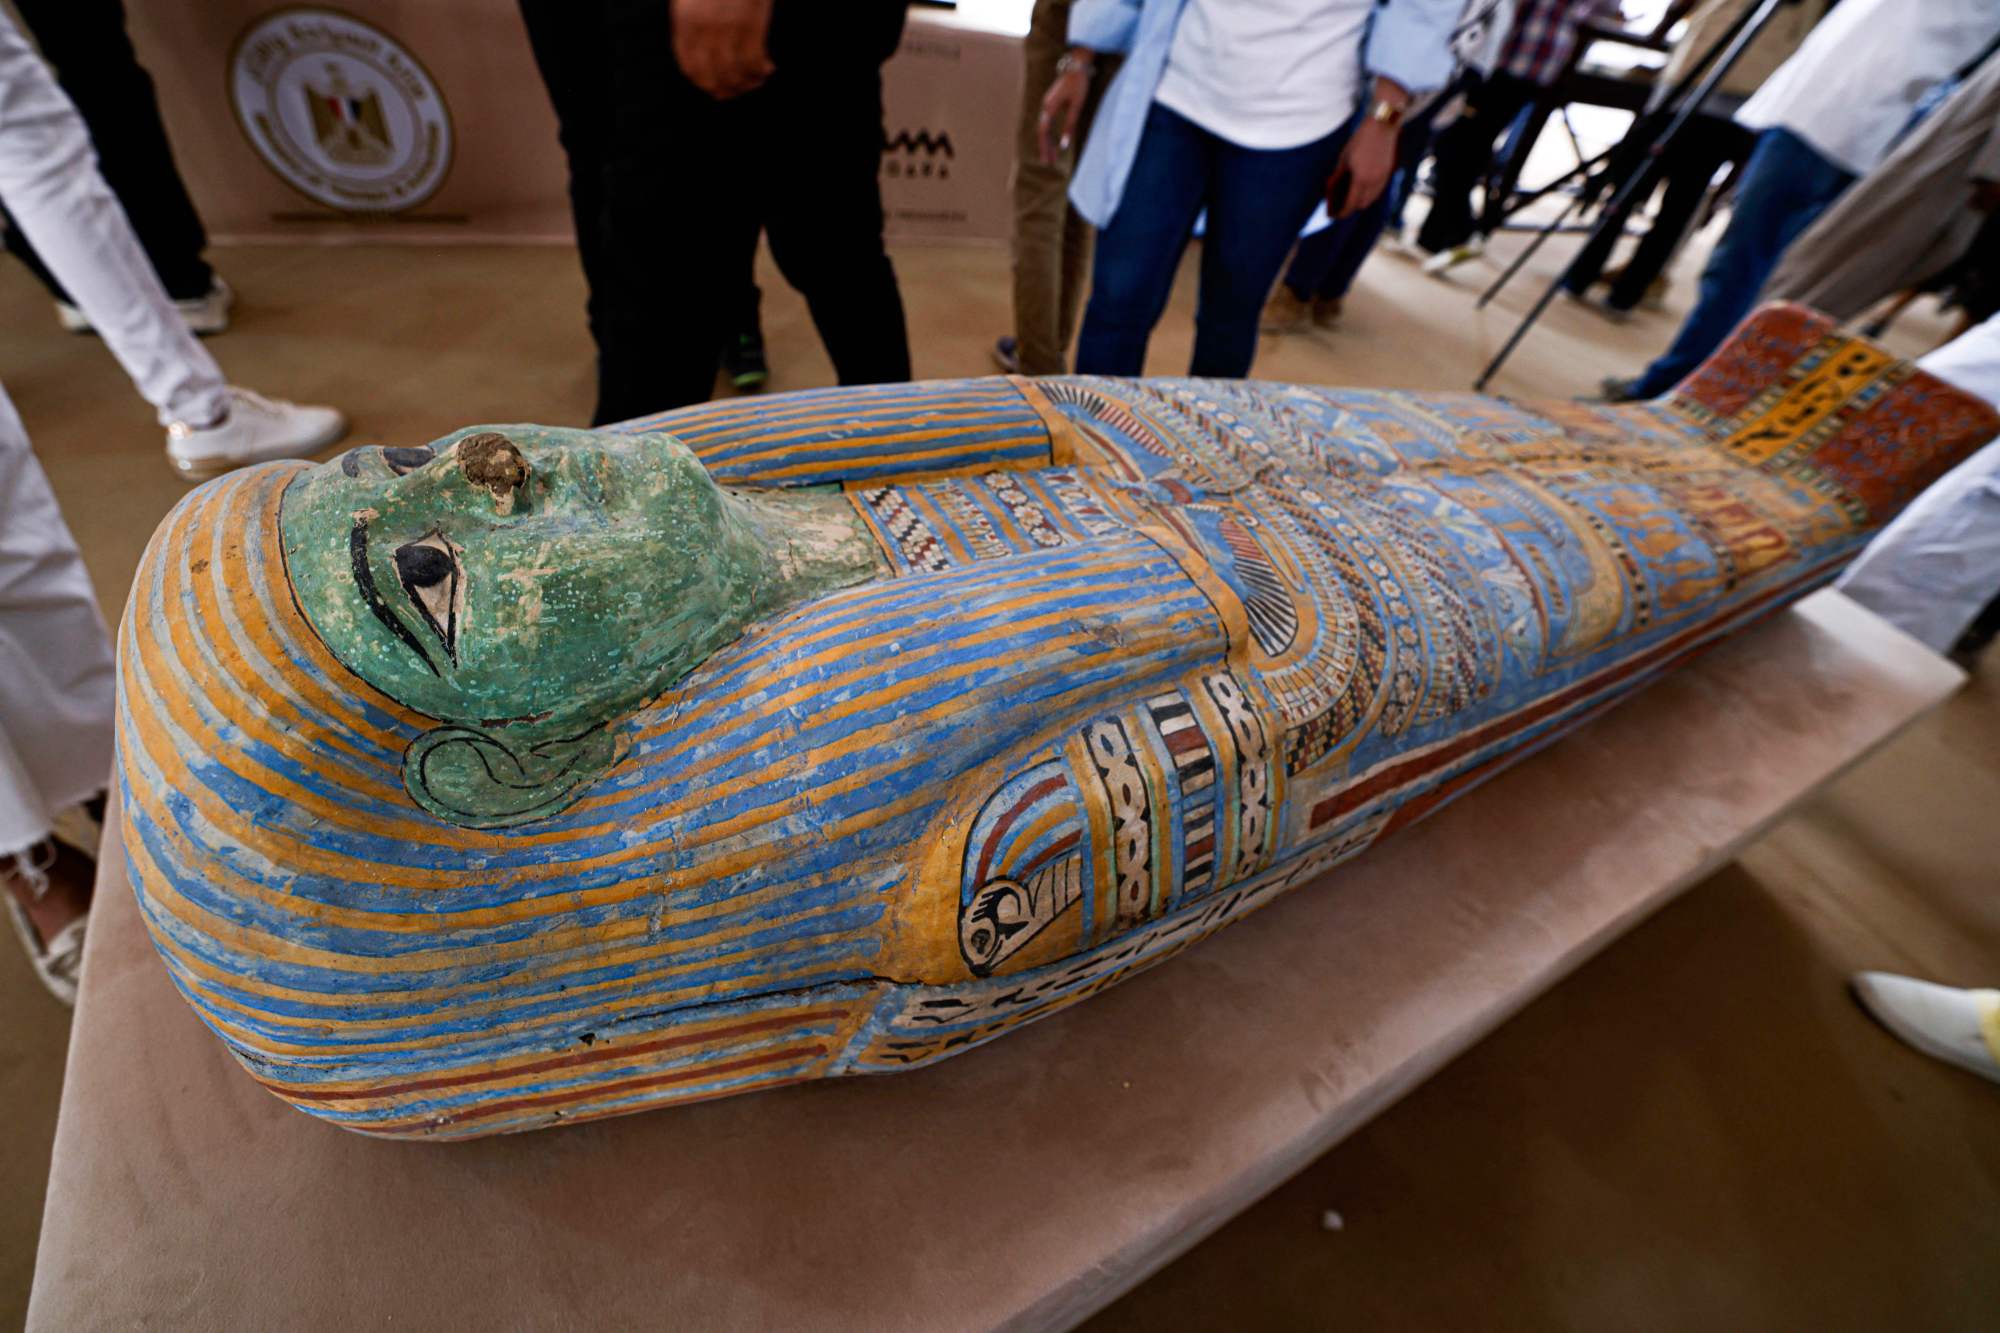 Visitors observe a newly discovered sarcophagus in the Saqqara necropolis, where archaeologists unearthed two human and animal embalming workshops as well as two tombs, south of Cairo on May 27, 2023. The head of Egypt's Supreme Council of Antiquities, told reporters the embalming workshops, where humans and animals were mummified, "date back to the 30th dynasty" which reigned around 2,400 years ago. (Photo by Khaled DESOUKI / AFP) (Photo by KHALED DESOUKI/AFP via Getty Images)